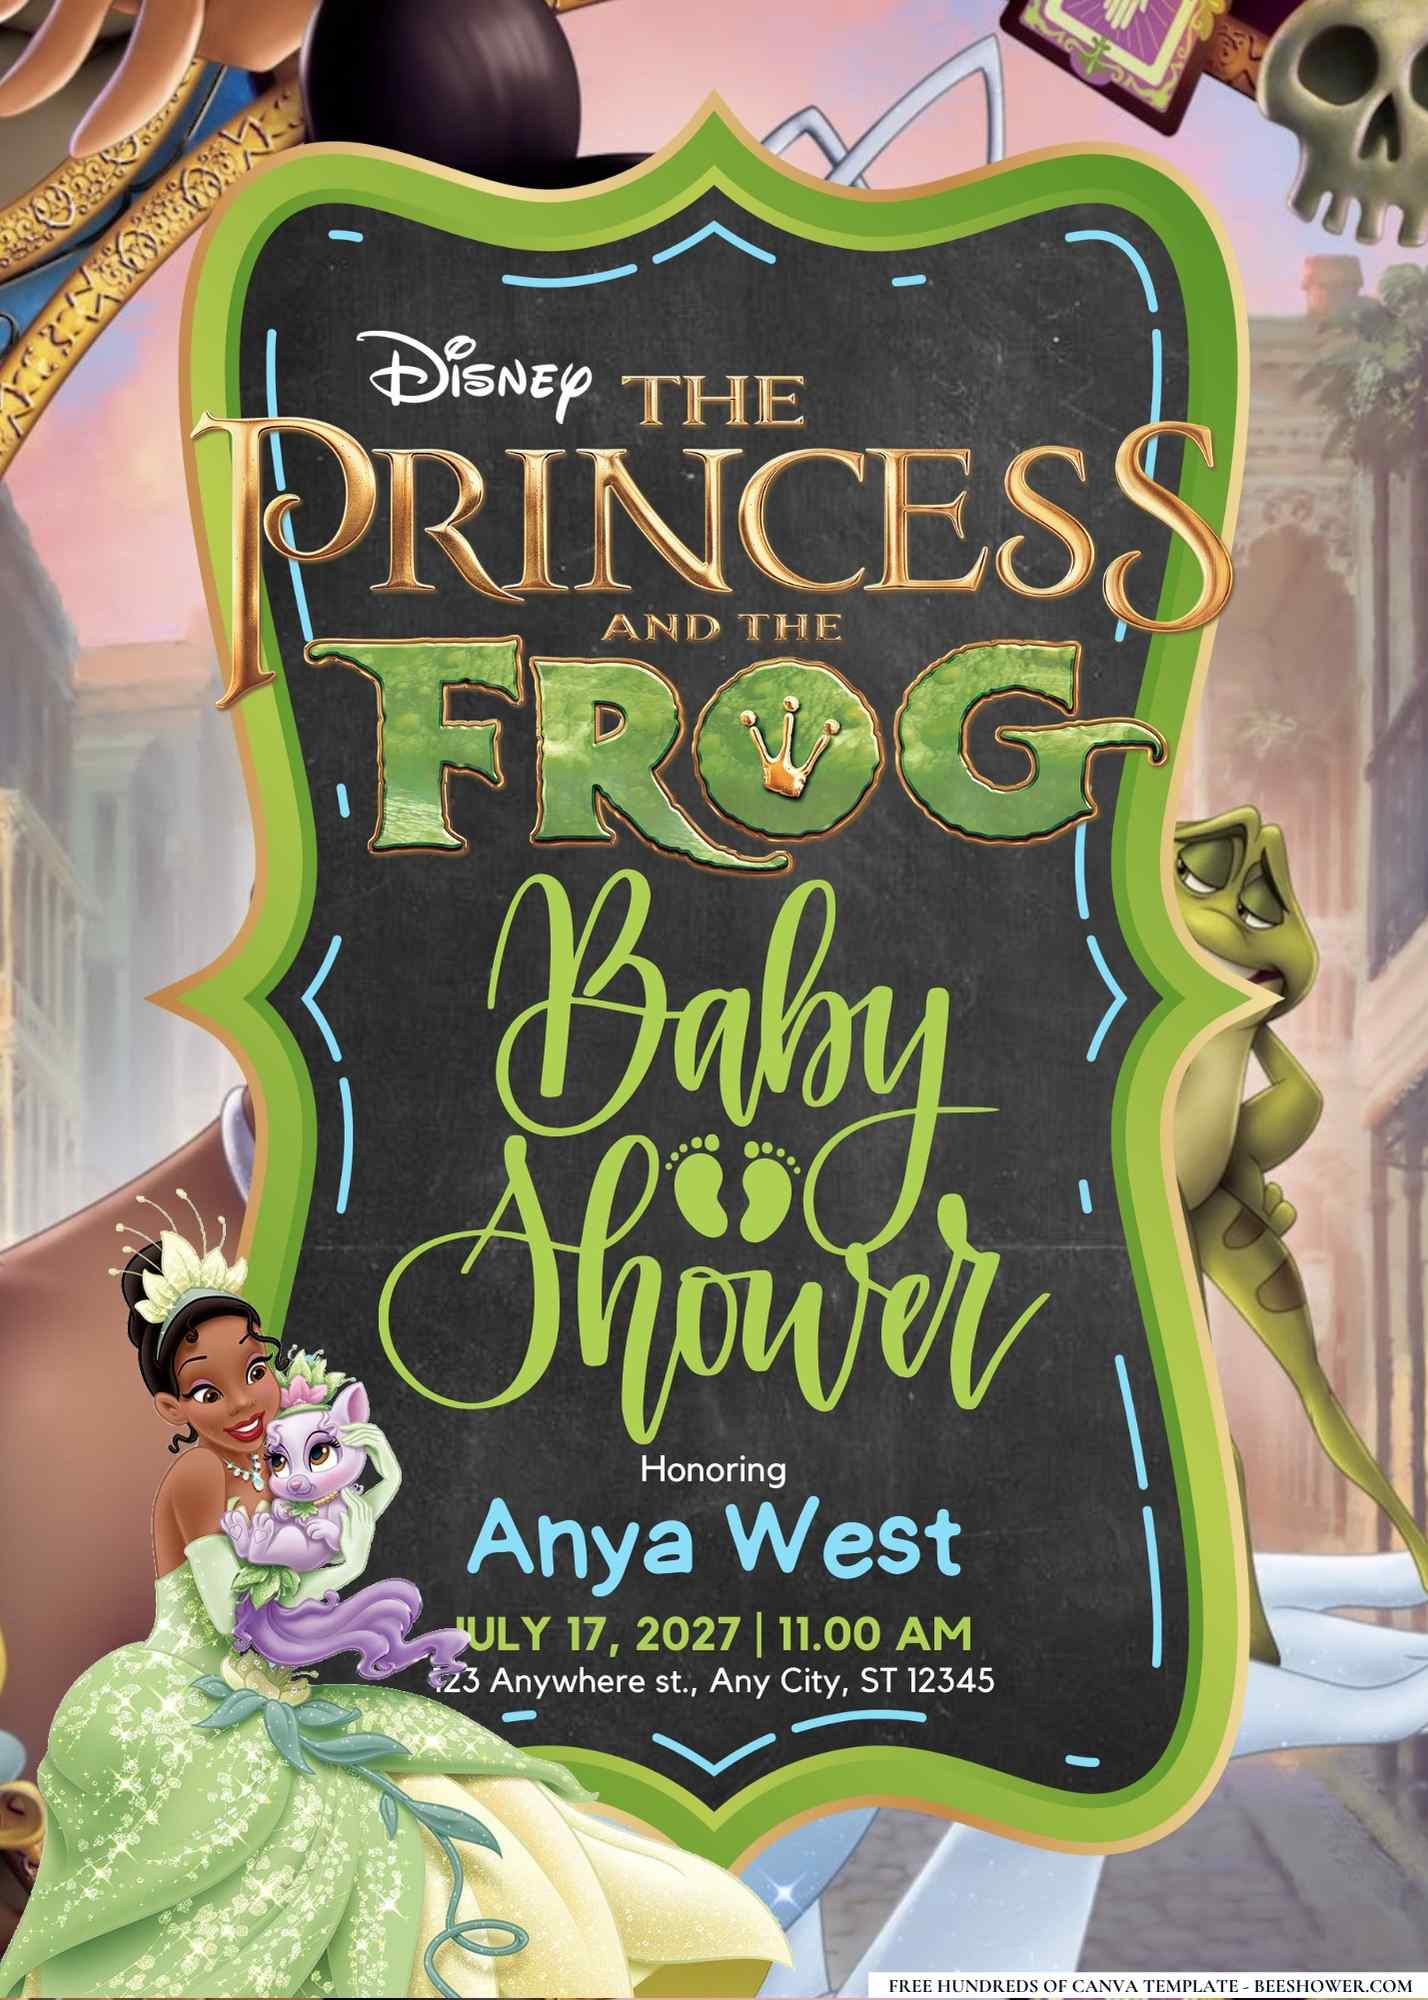 The Princess and the Frog Baby Shower Invitation